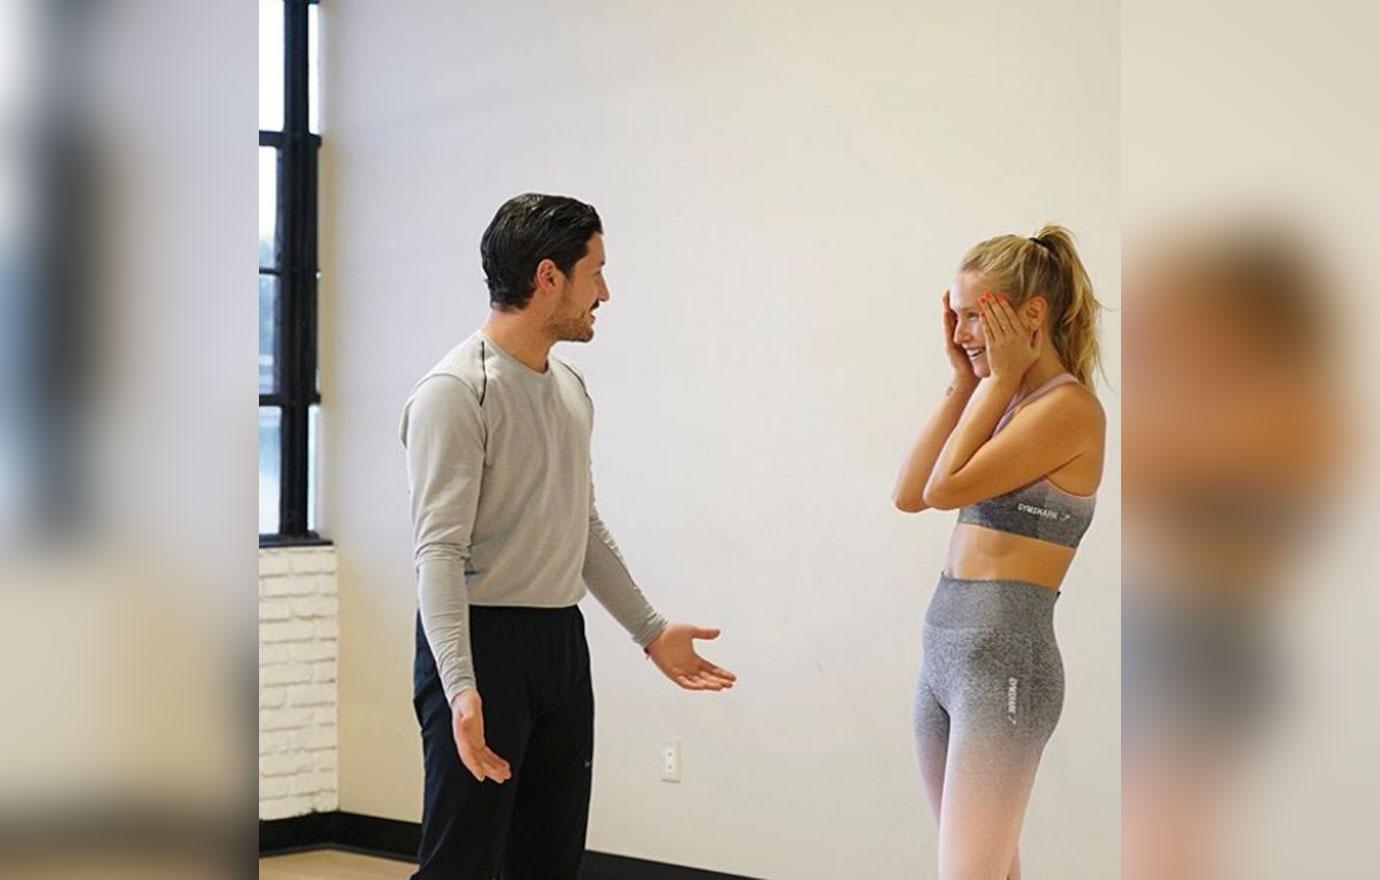 Sailor Brinkley-Cook wears a crop top and leggings while attending a dance  practice at DWTS